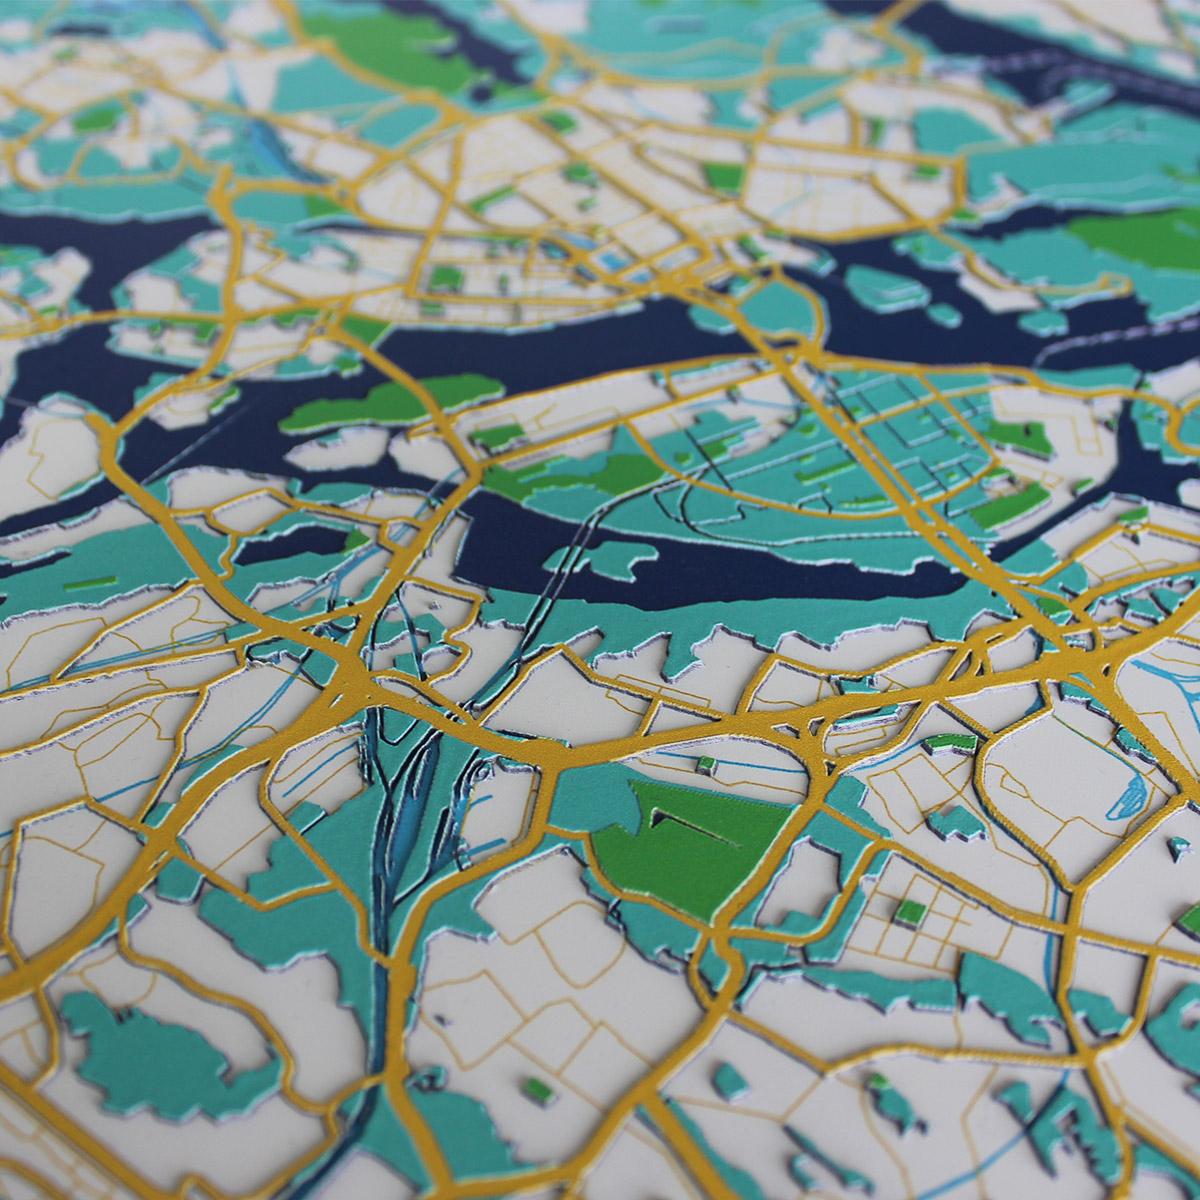 ElevatedMaps Launches to Create Artistic 3D Printed Custom Maps of